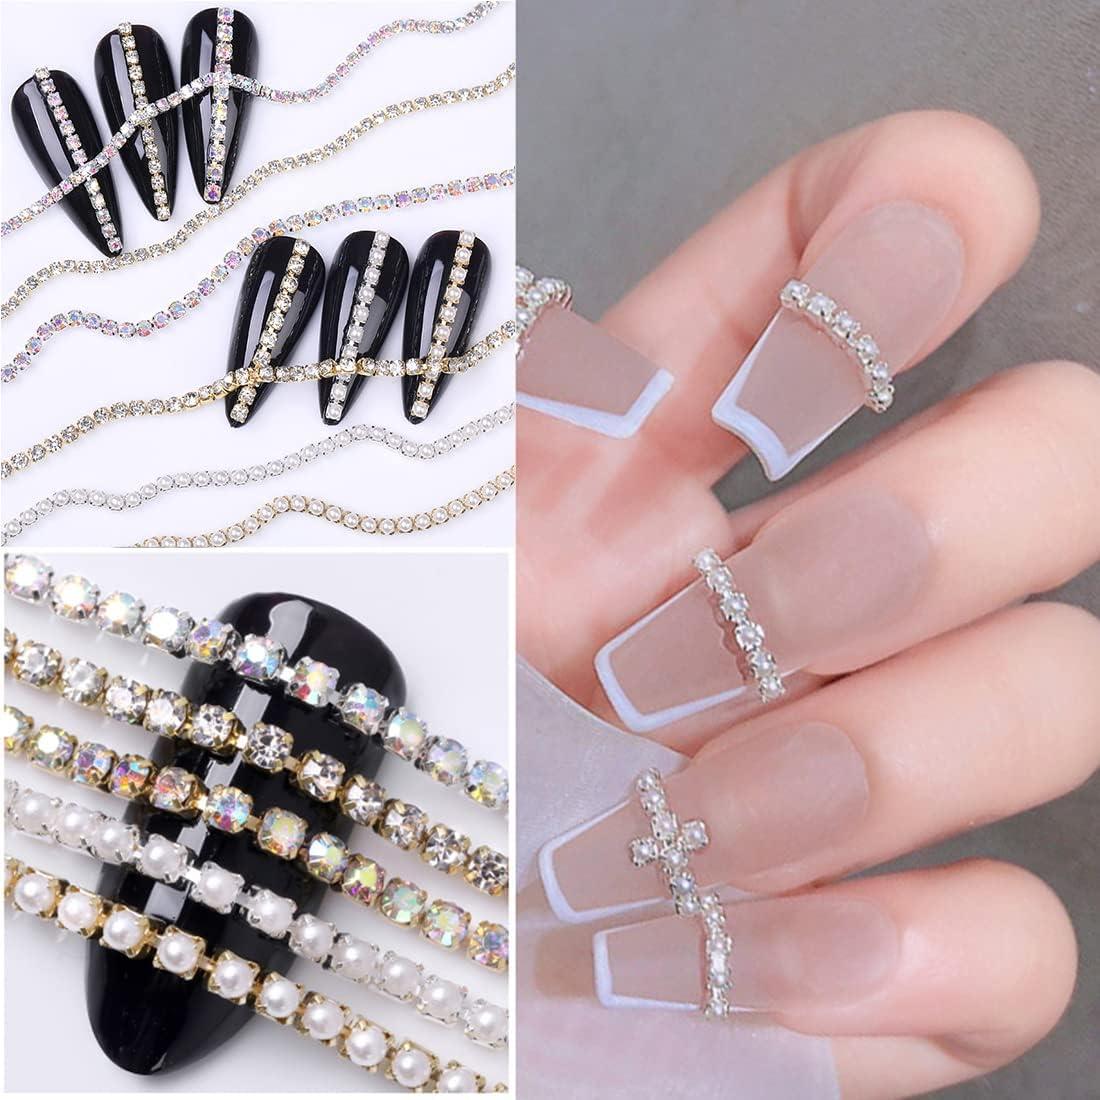 3D 25cm Nail Charms Jewelry For Acrylic Nails Pearl Claw Chain Nail  Rhinestone~